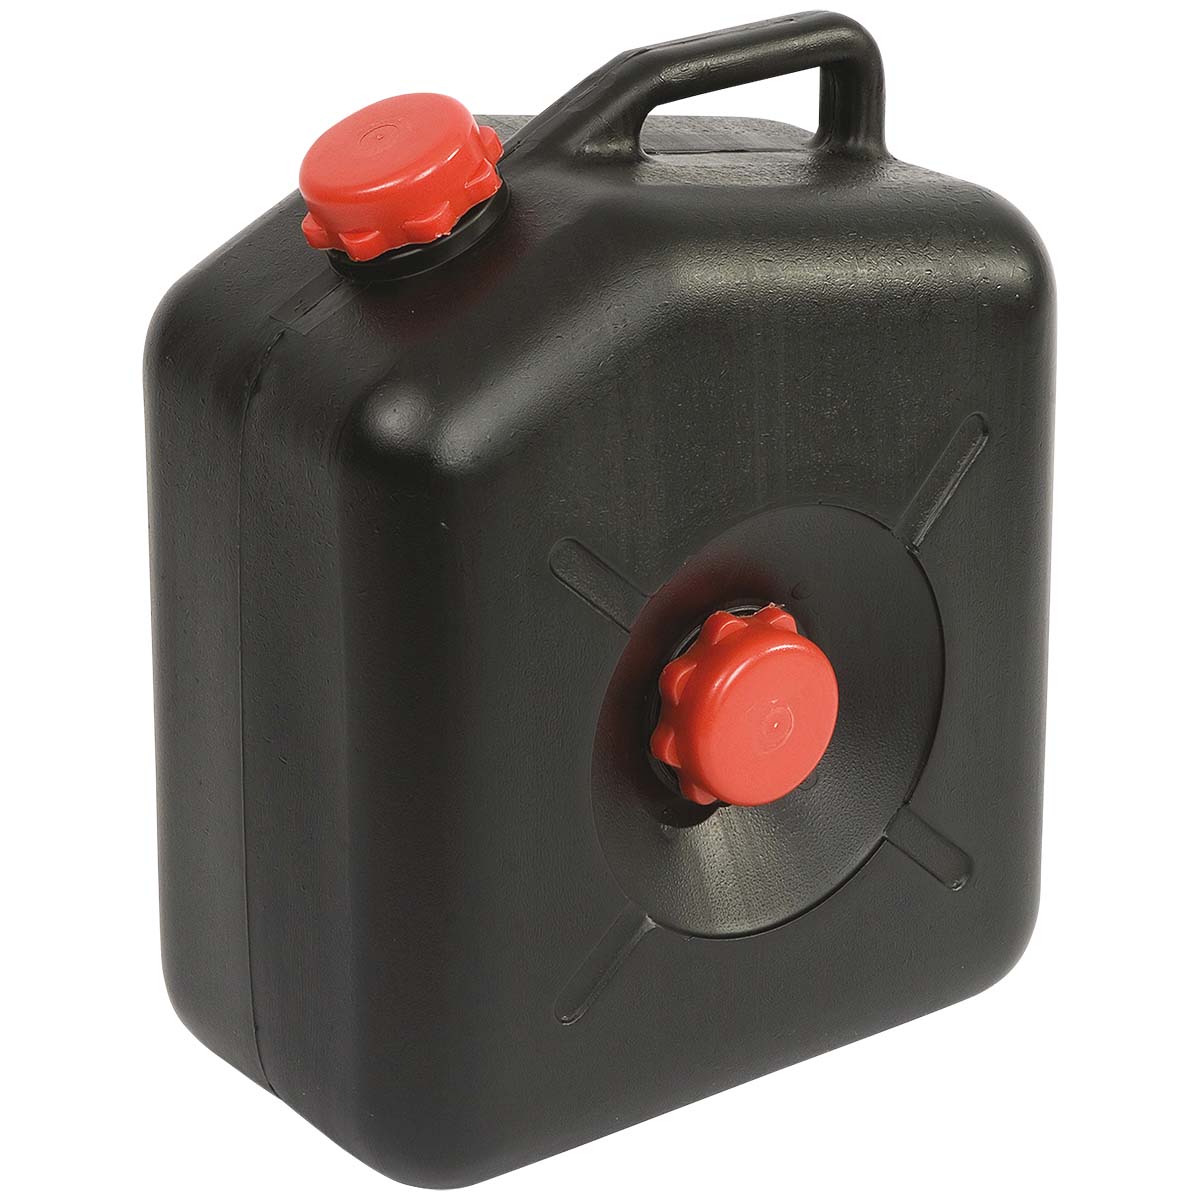 6603221 A practical and handy waste water tank. To collect the dirty water in. The separate inlets and outlets on both sides make it easy to empty. Both openings are closed with a sturdy screw cap.